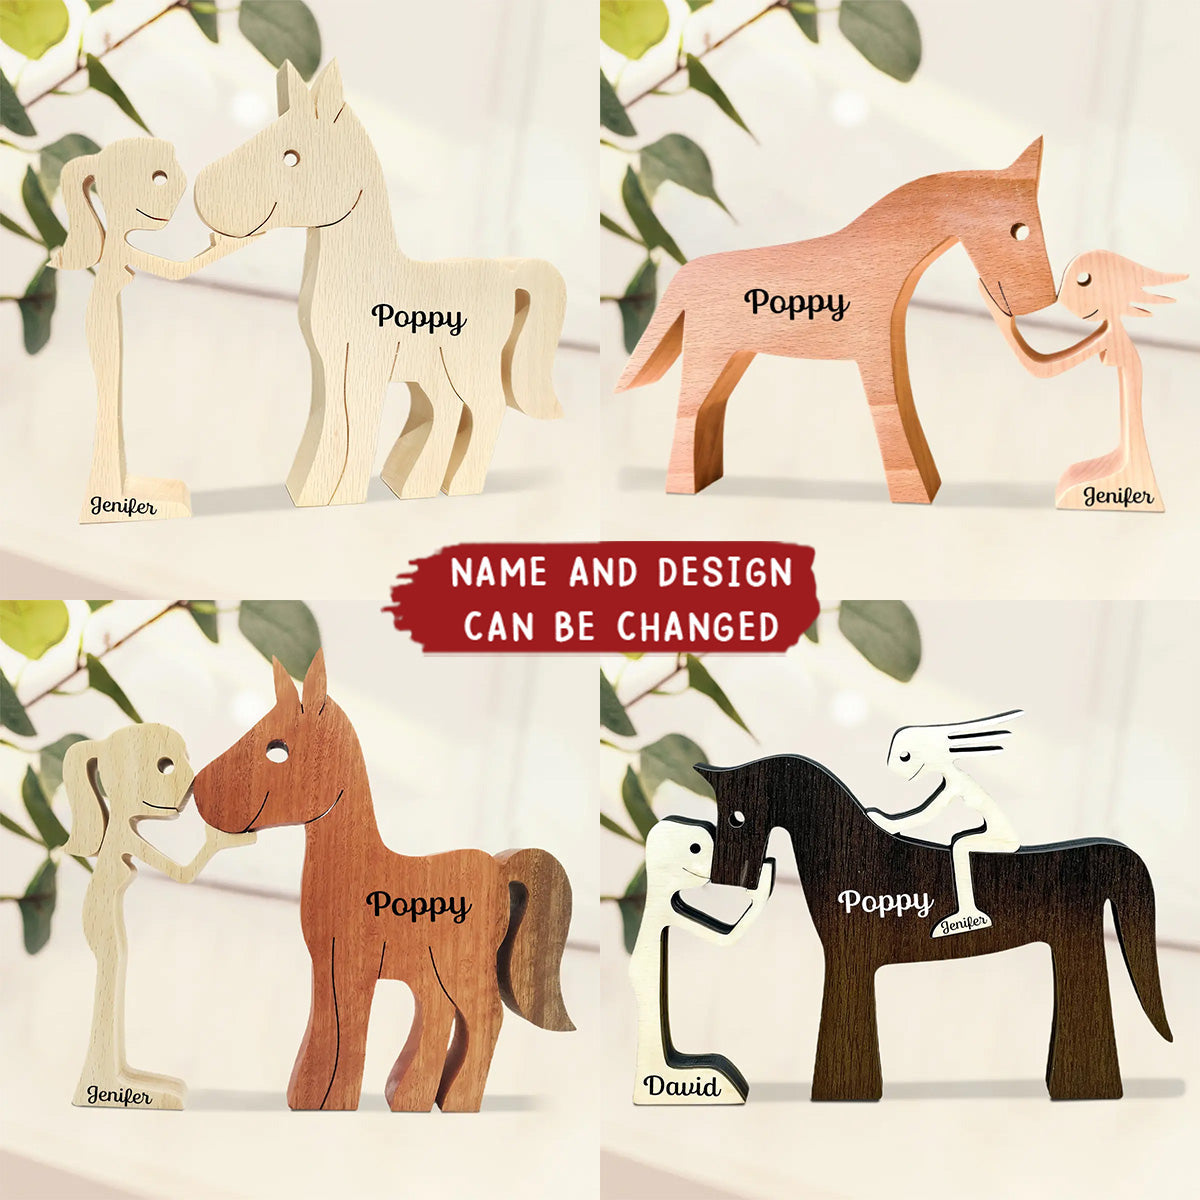 Personalized Wooden Horse Carvings - Gift For Horse Lovers Decorative Wooden Sculptures Printed